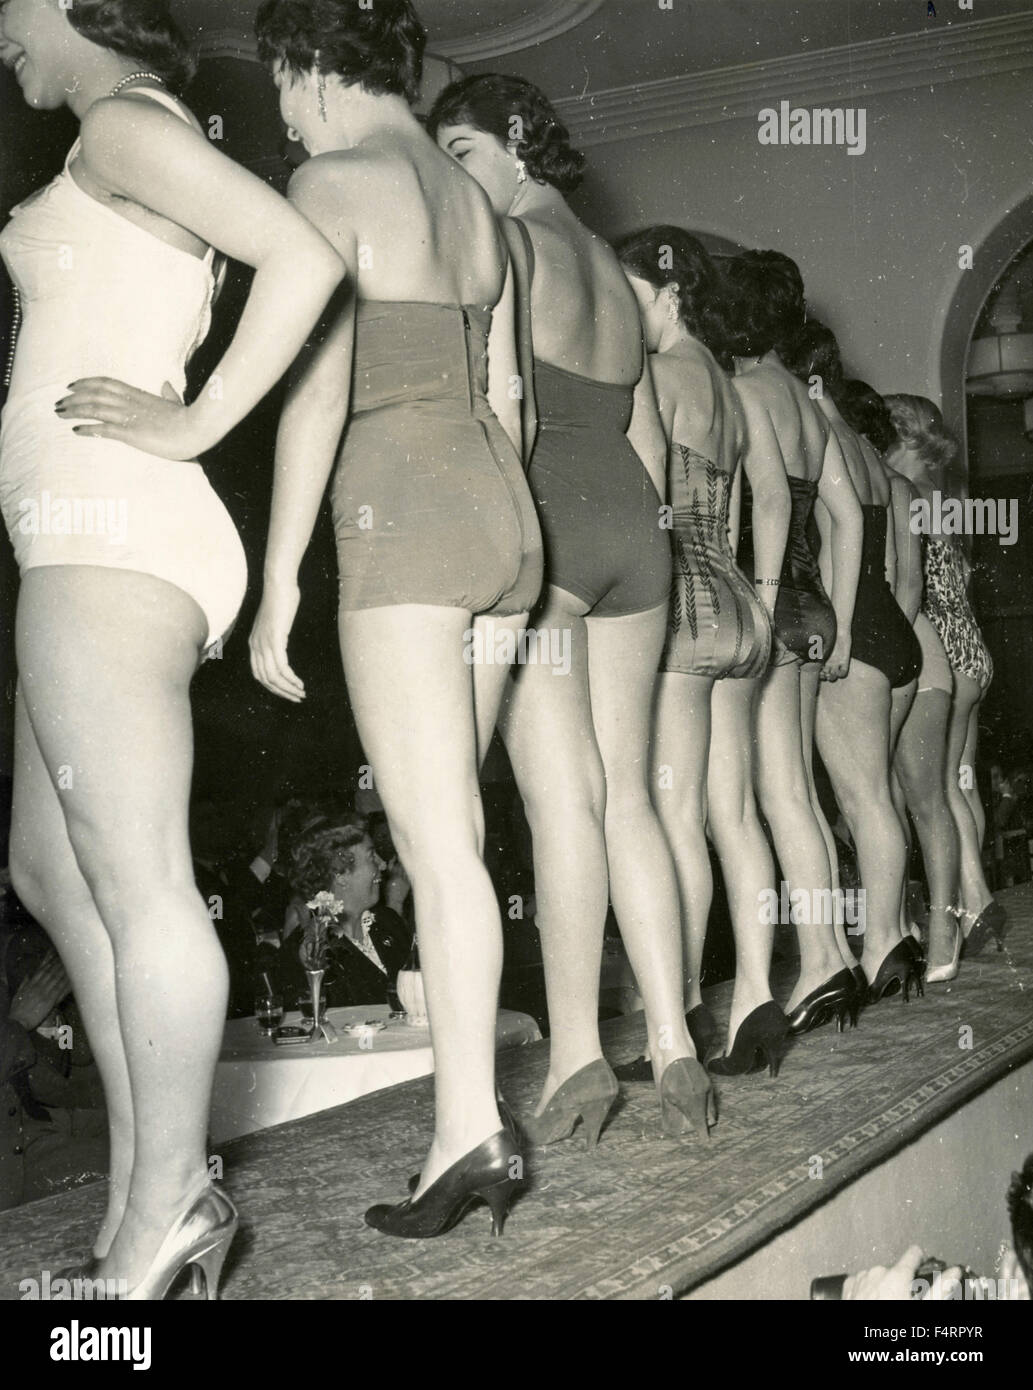 Parade of Misses viewed from behind, Italy Stock Photo